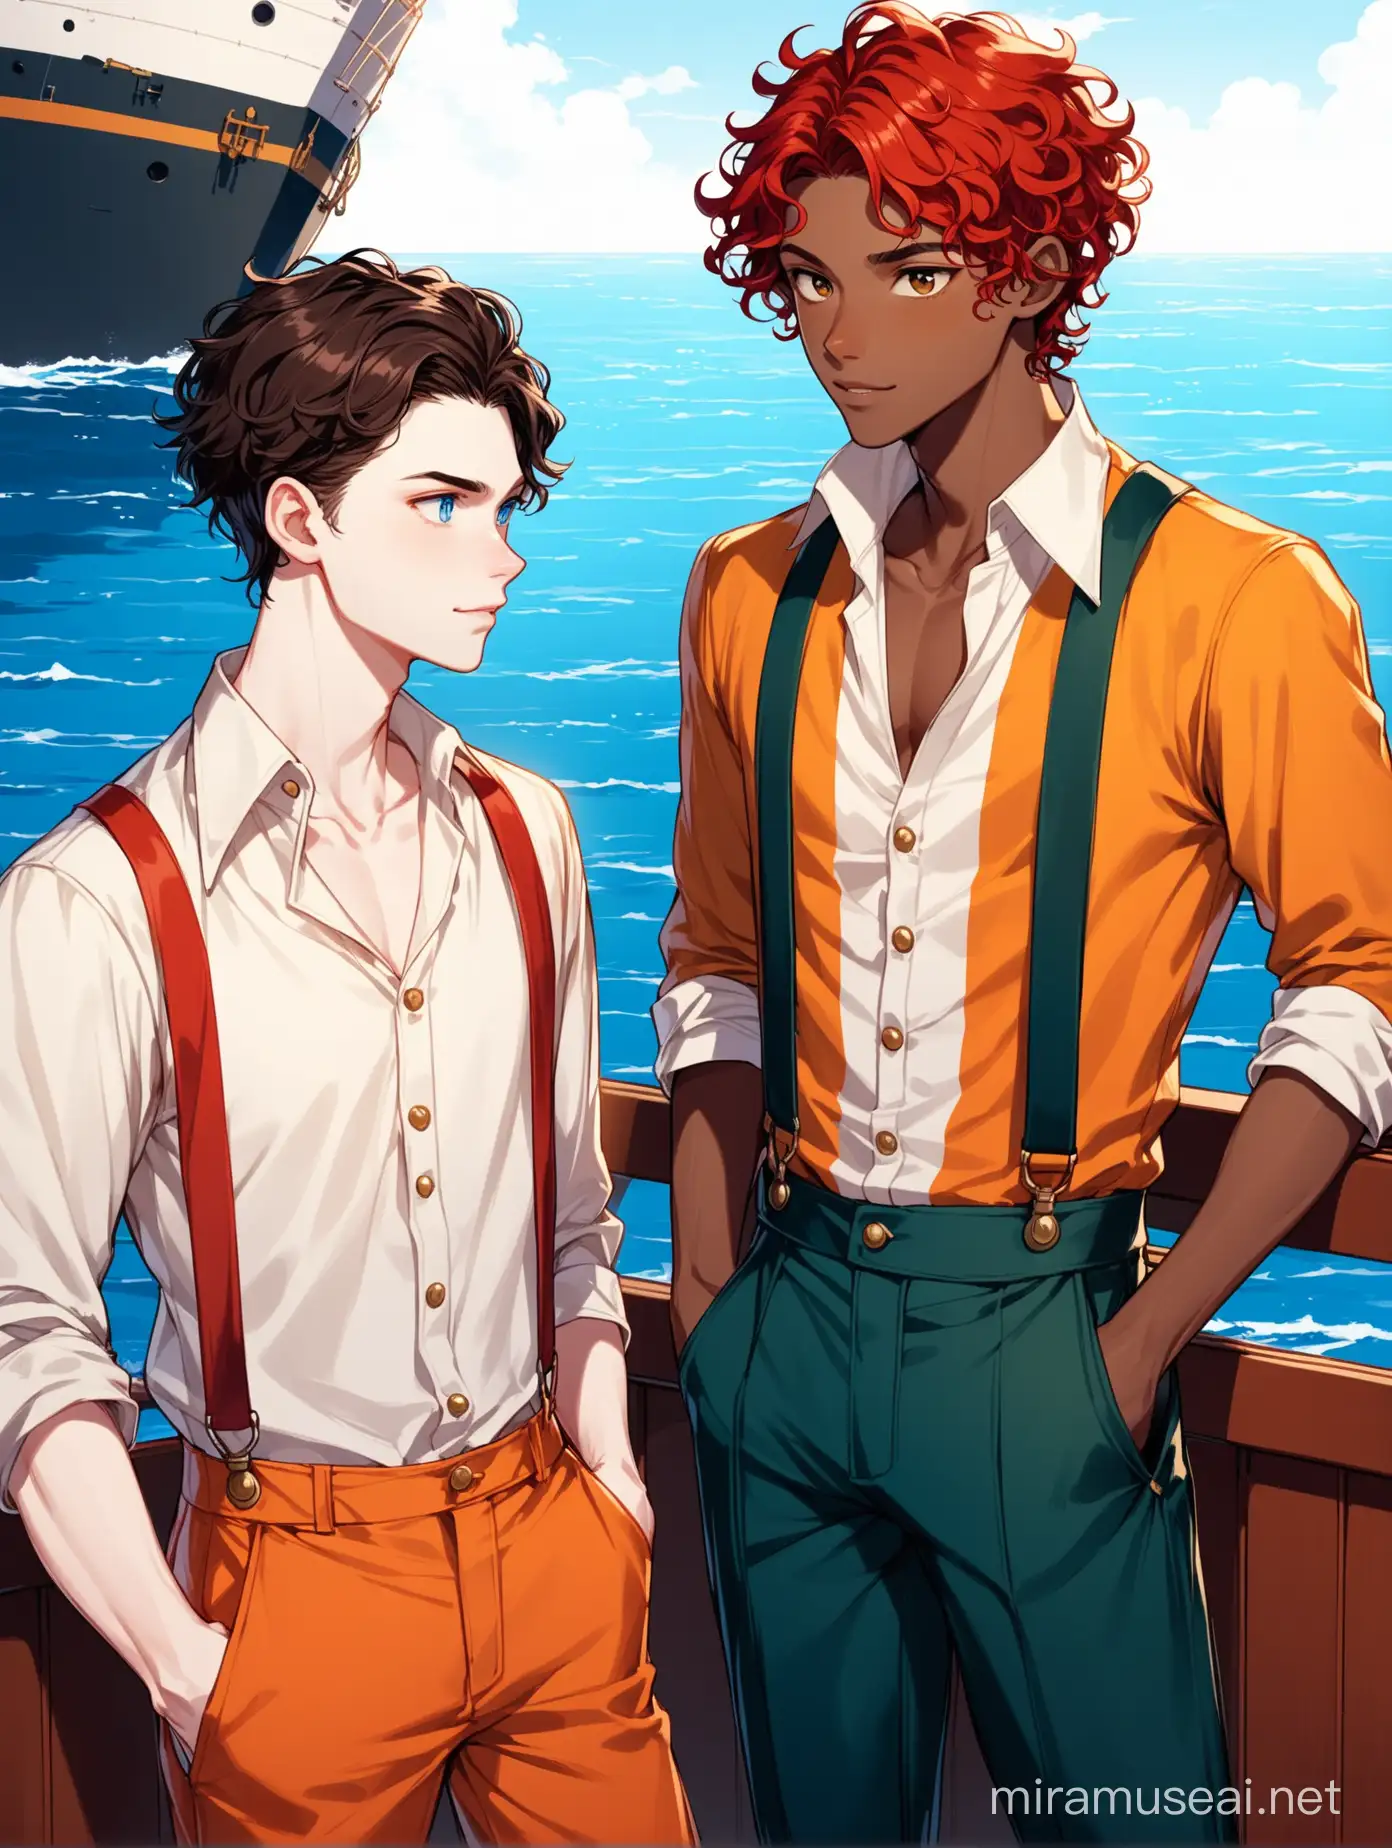 Serious Discussion on Ship Deck Wylan and Jesper in Bright Attire